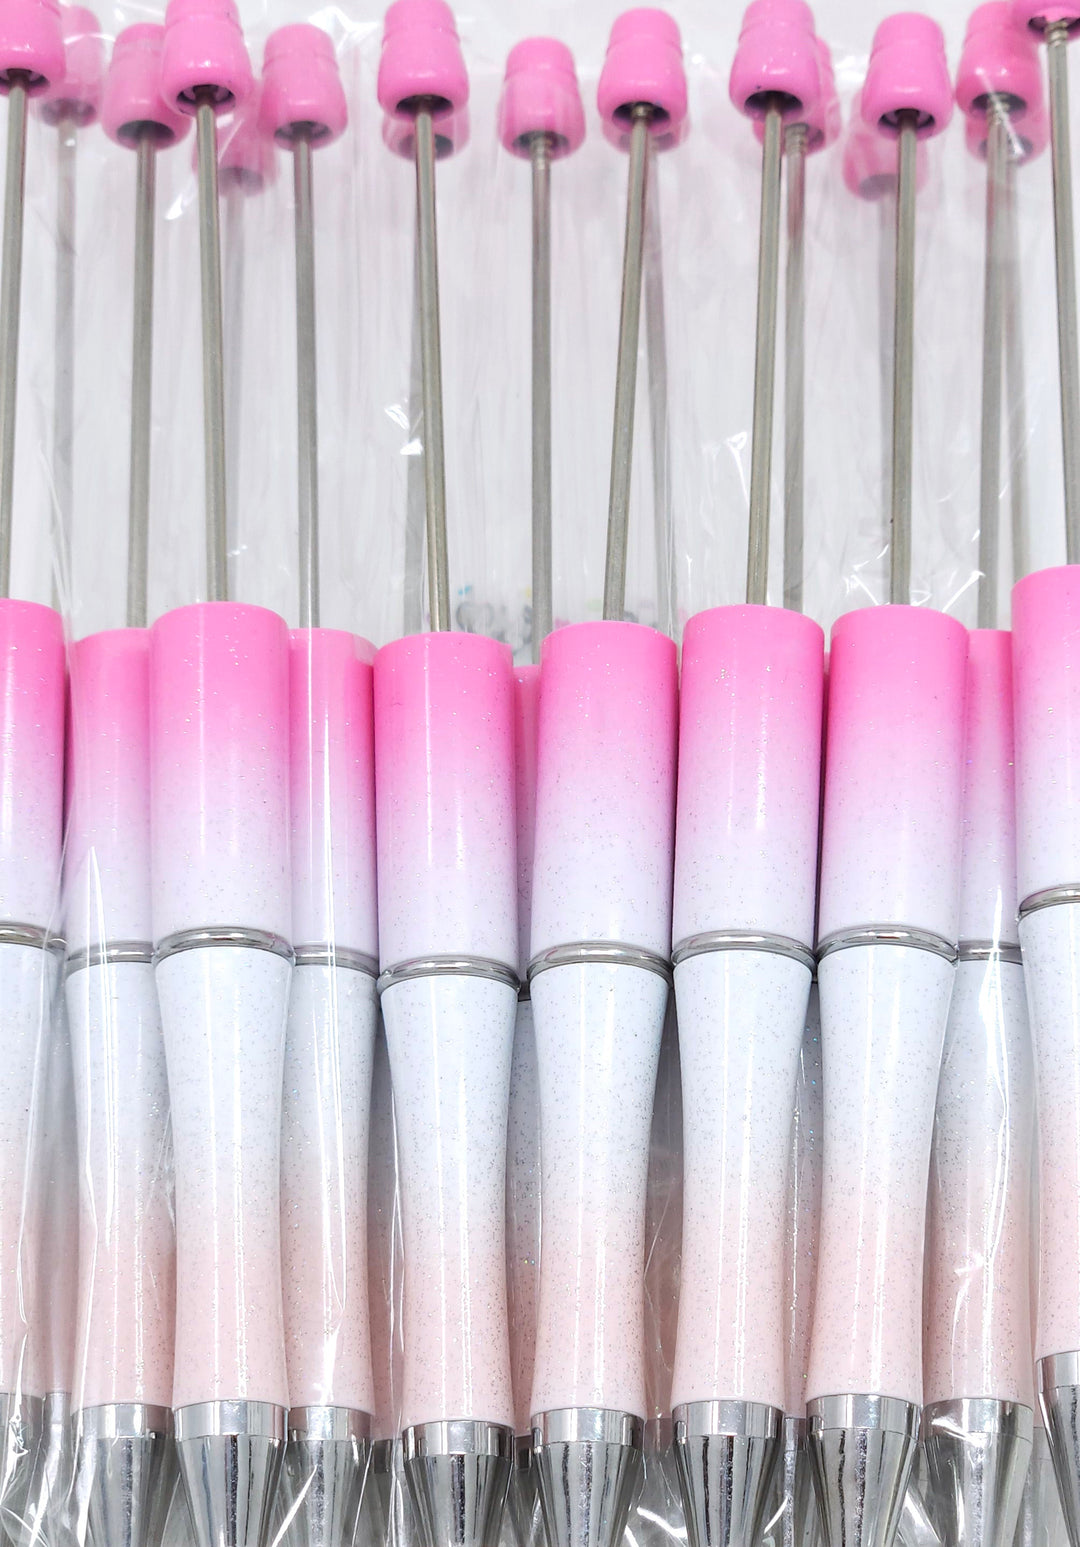 Pink to Peach Ombre Glittery Beadable Plastic Pen